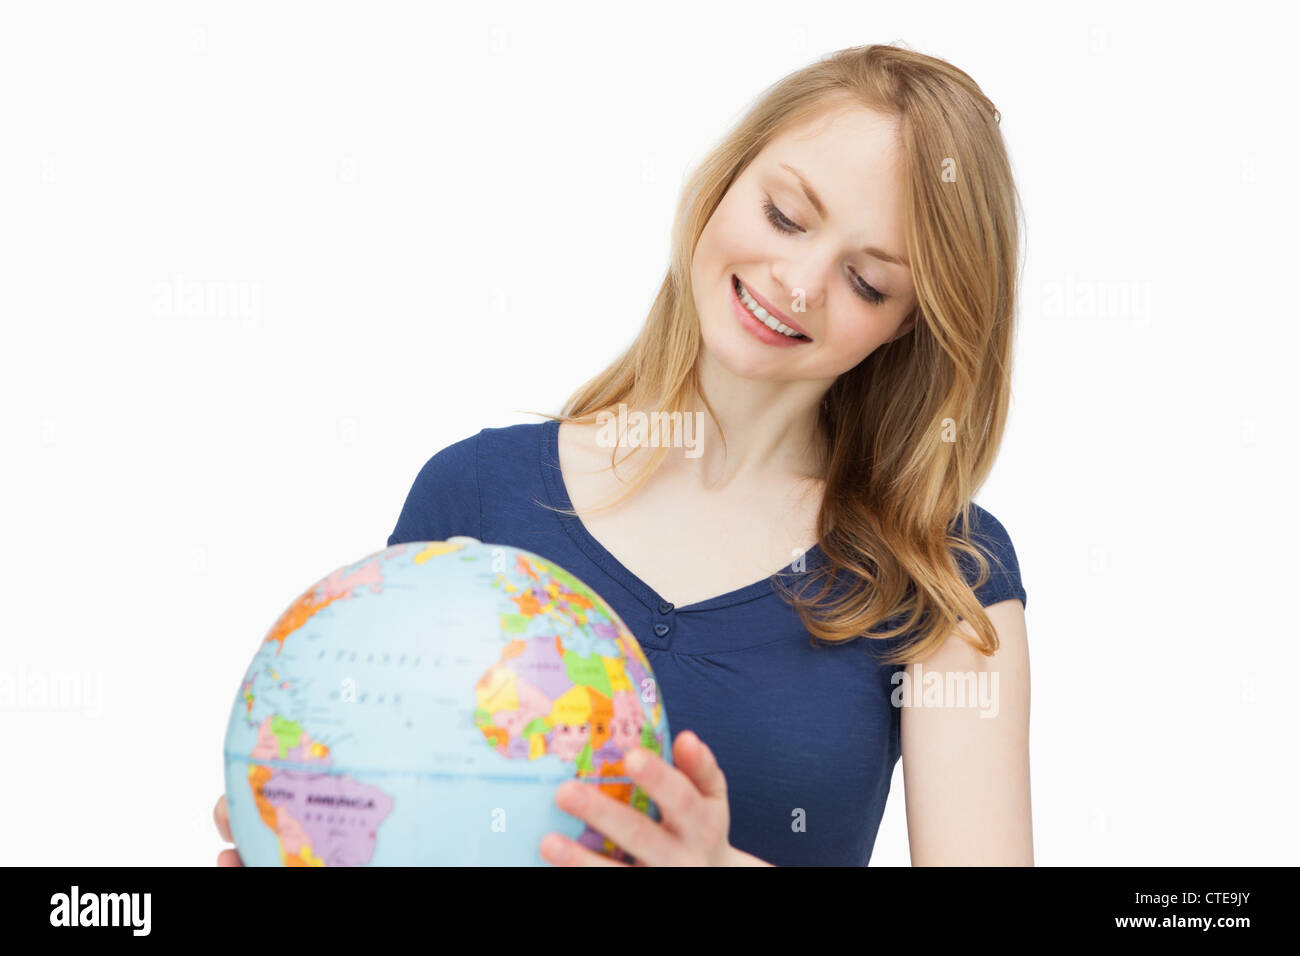 Woman holding a globe while smiling Stock Photo